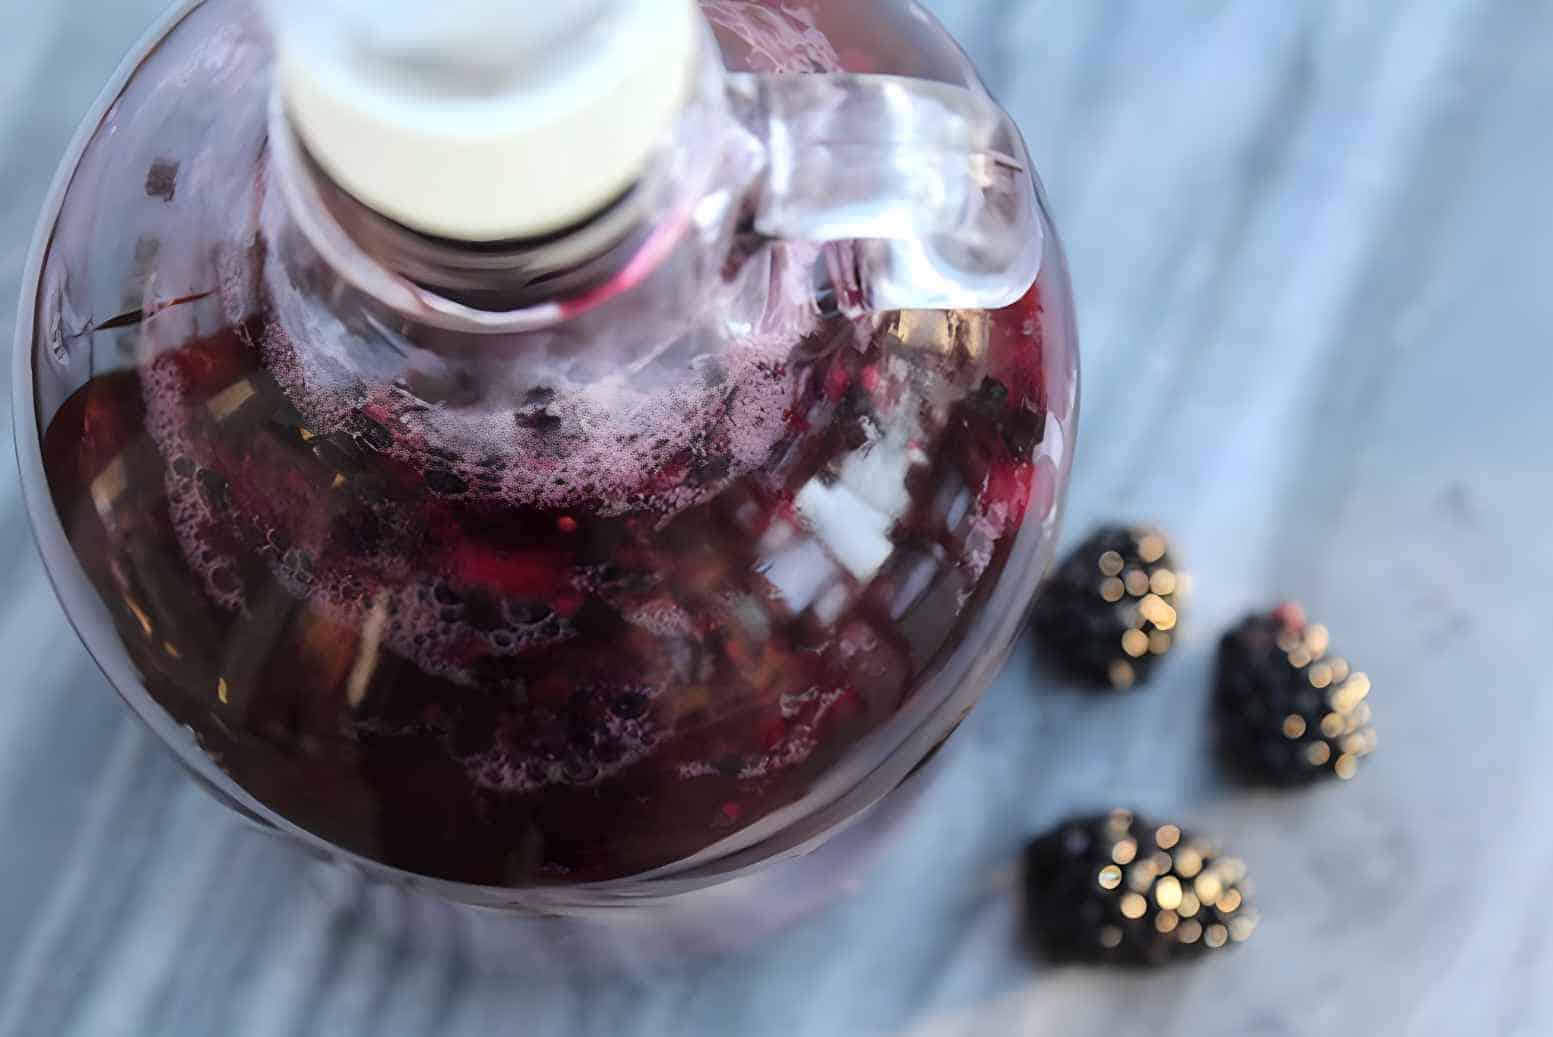 Why are blackberry wine recipes popular